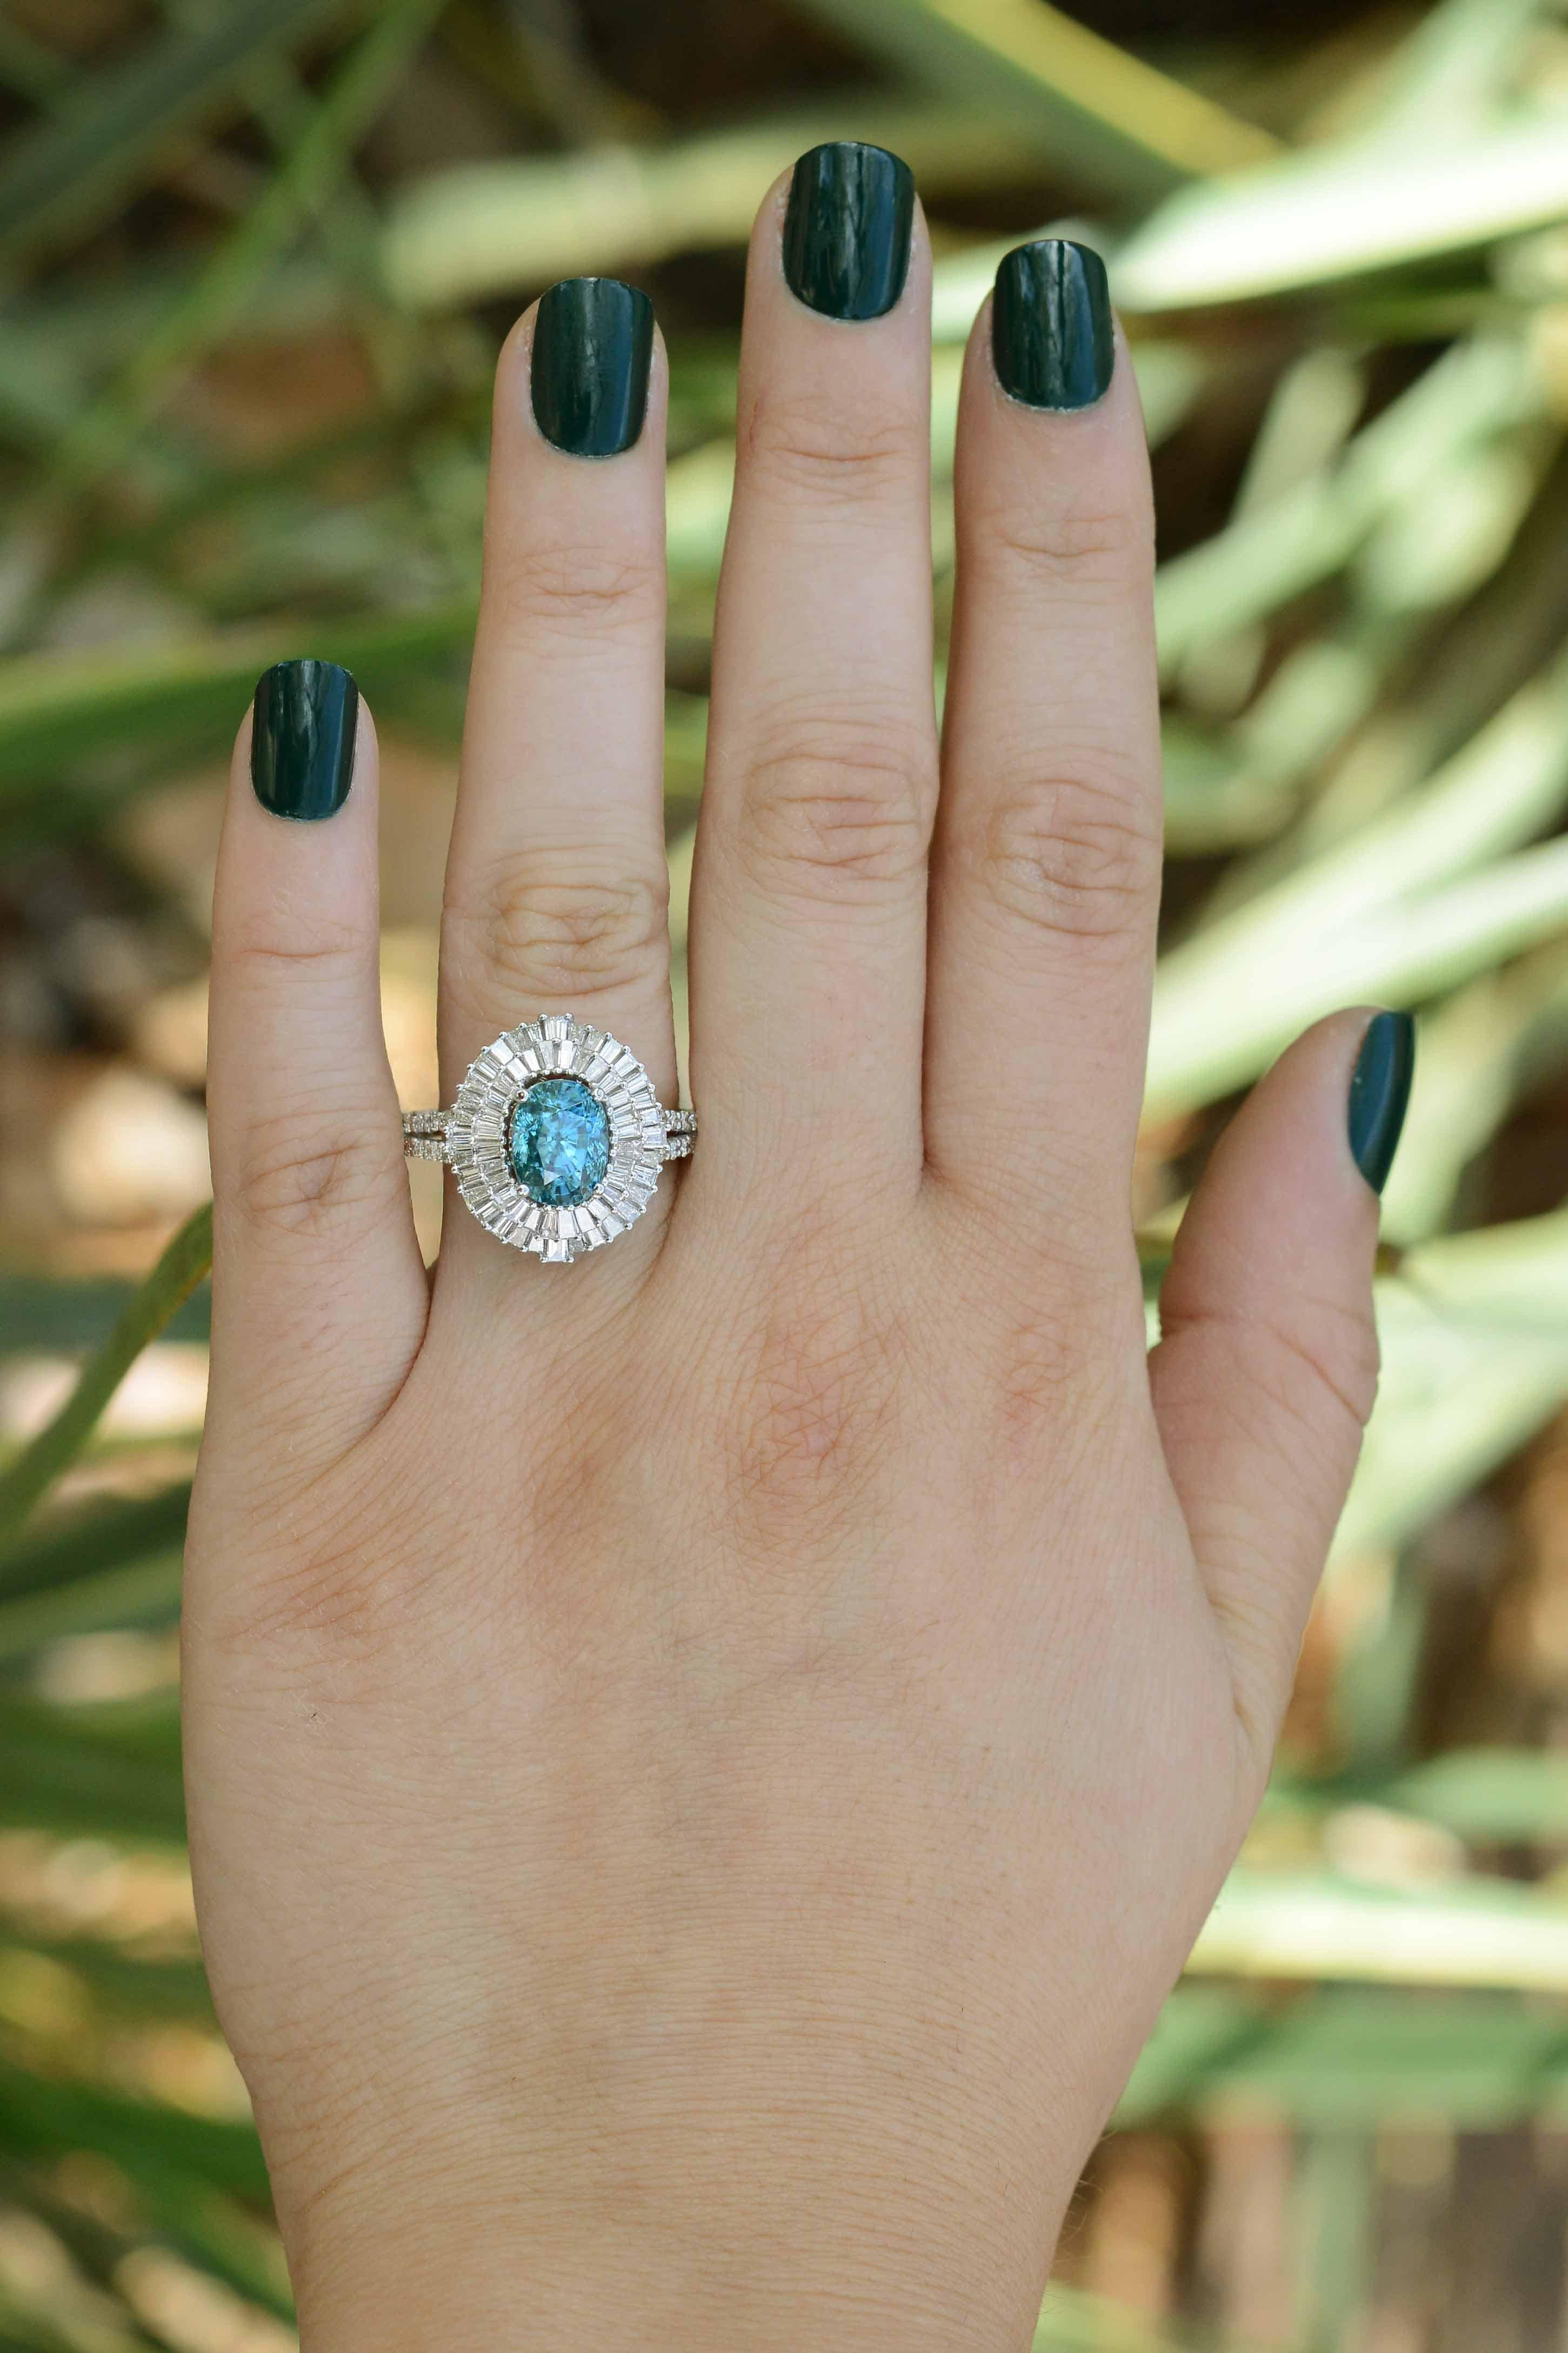 This is without a doubt a show-stopping Mid Century modern ballerina ring. The vivid, intense blue zircon gemstone is the focal point of this glamorous statement jewelry piece is of considerable size at 5.24 carats. Along with 58 baguette diamonds